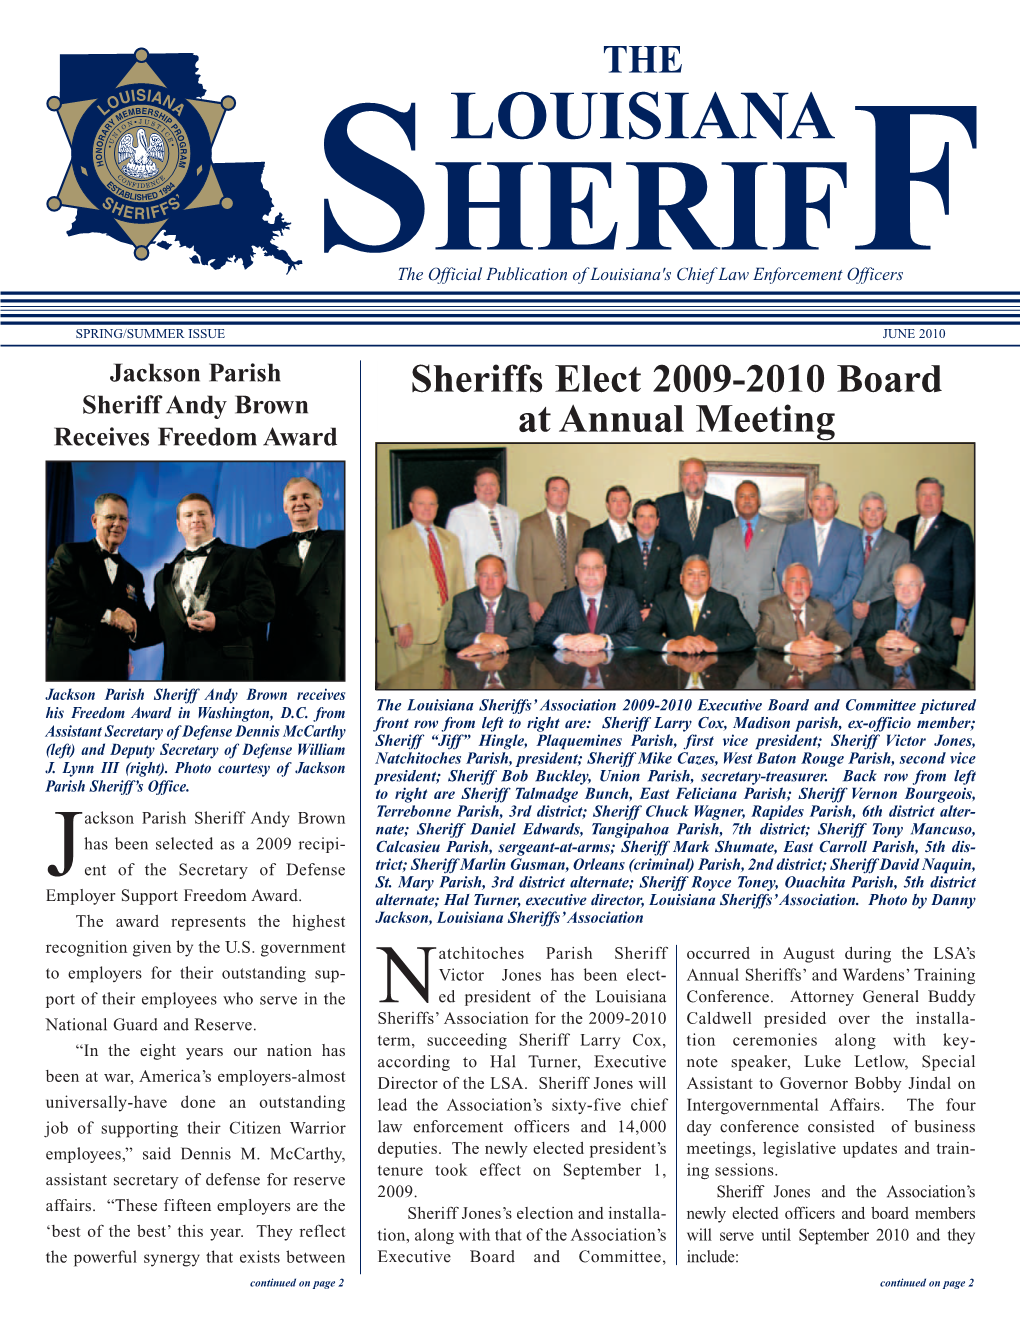 The Sheriffs Elect 2009-2010 Board at Annual Meeting